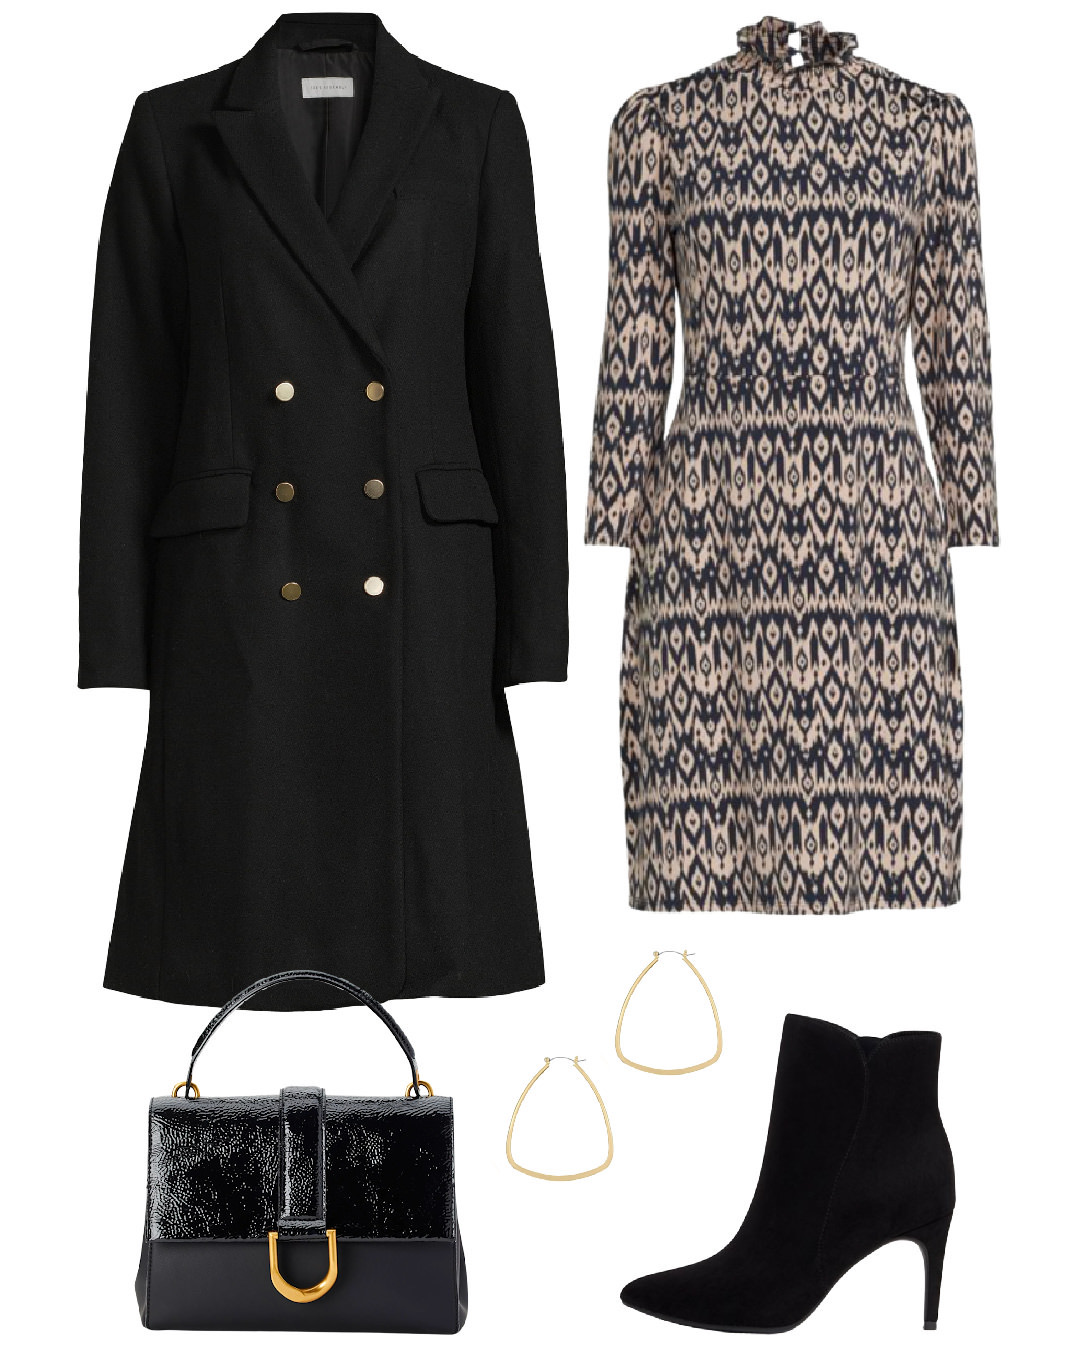 Walmart winter outfit idea with dress and black wool coat natalie yerger